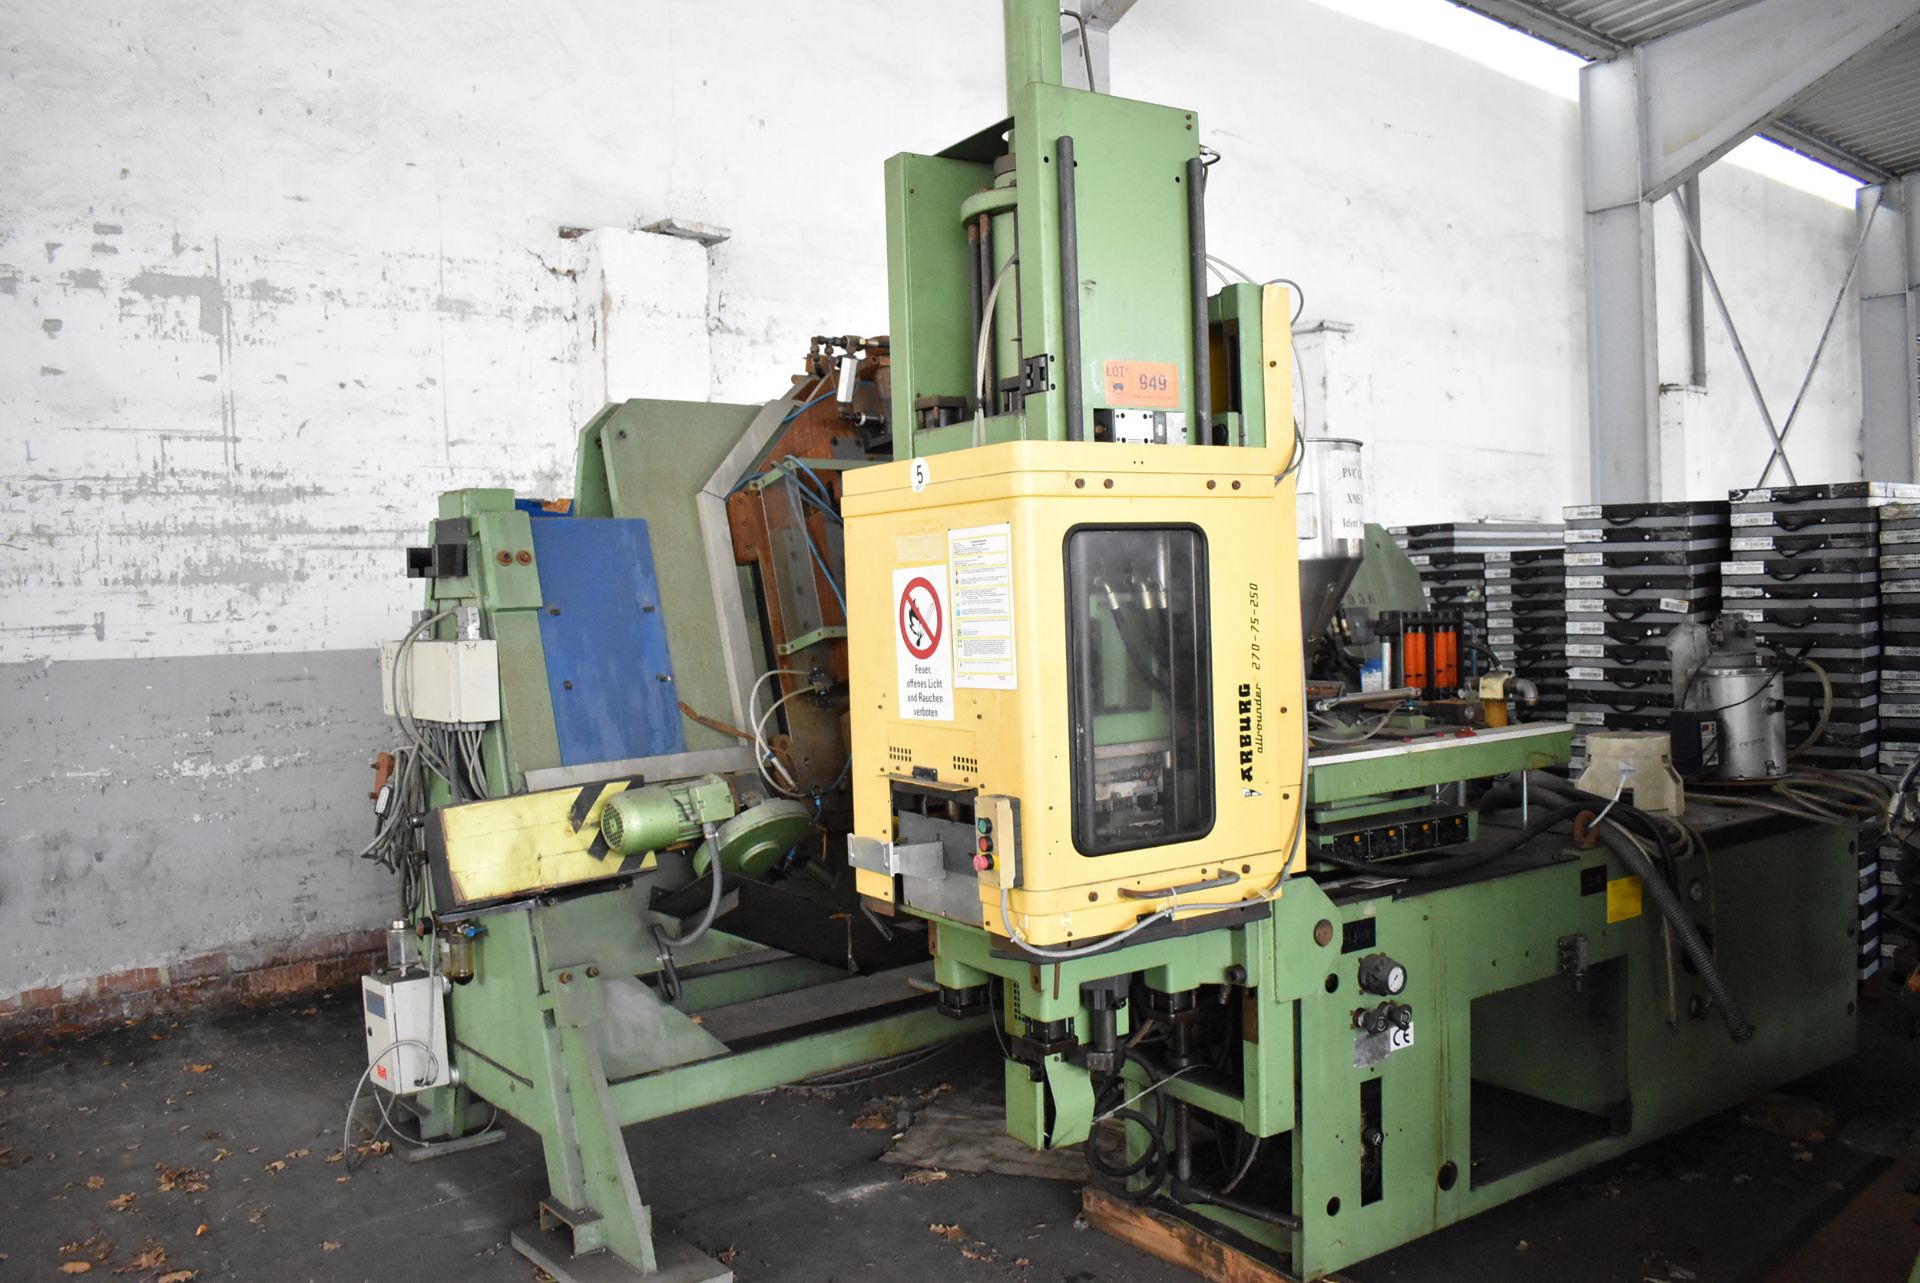 ARBURG ALLROUNDER 270-75-25 VERTICAL INJECTION MOLDING MACHINE WITH 250 TON CAP, S/N 161219 (HOF) [